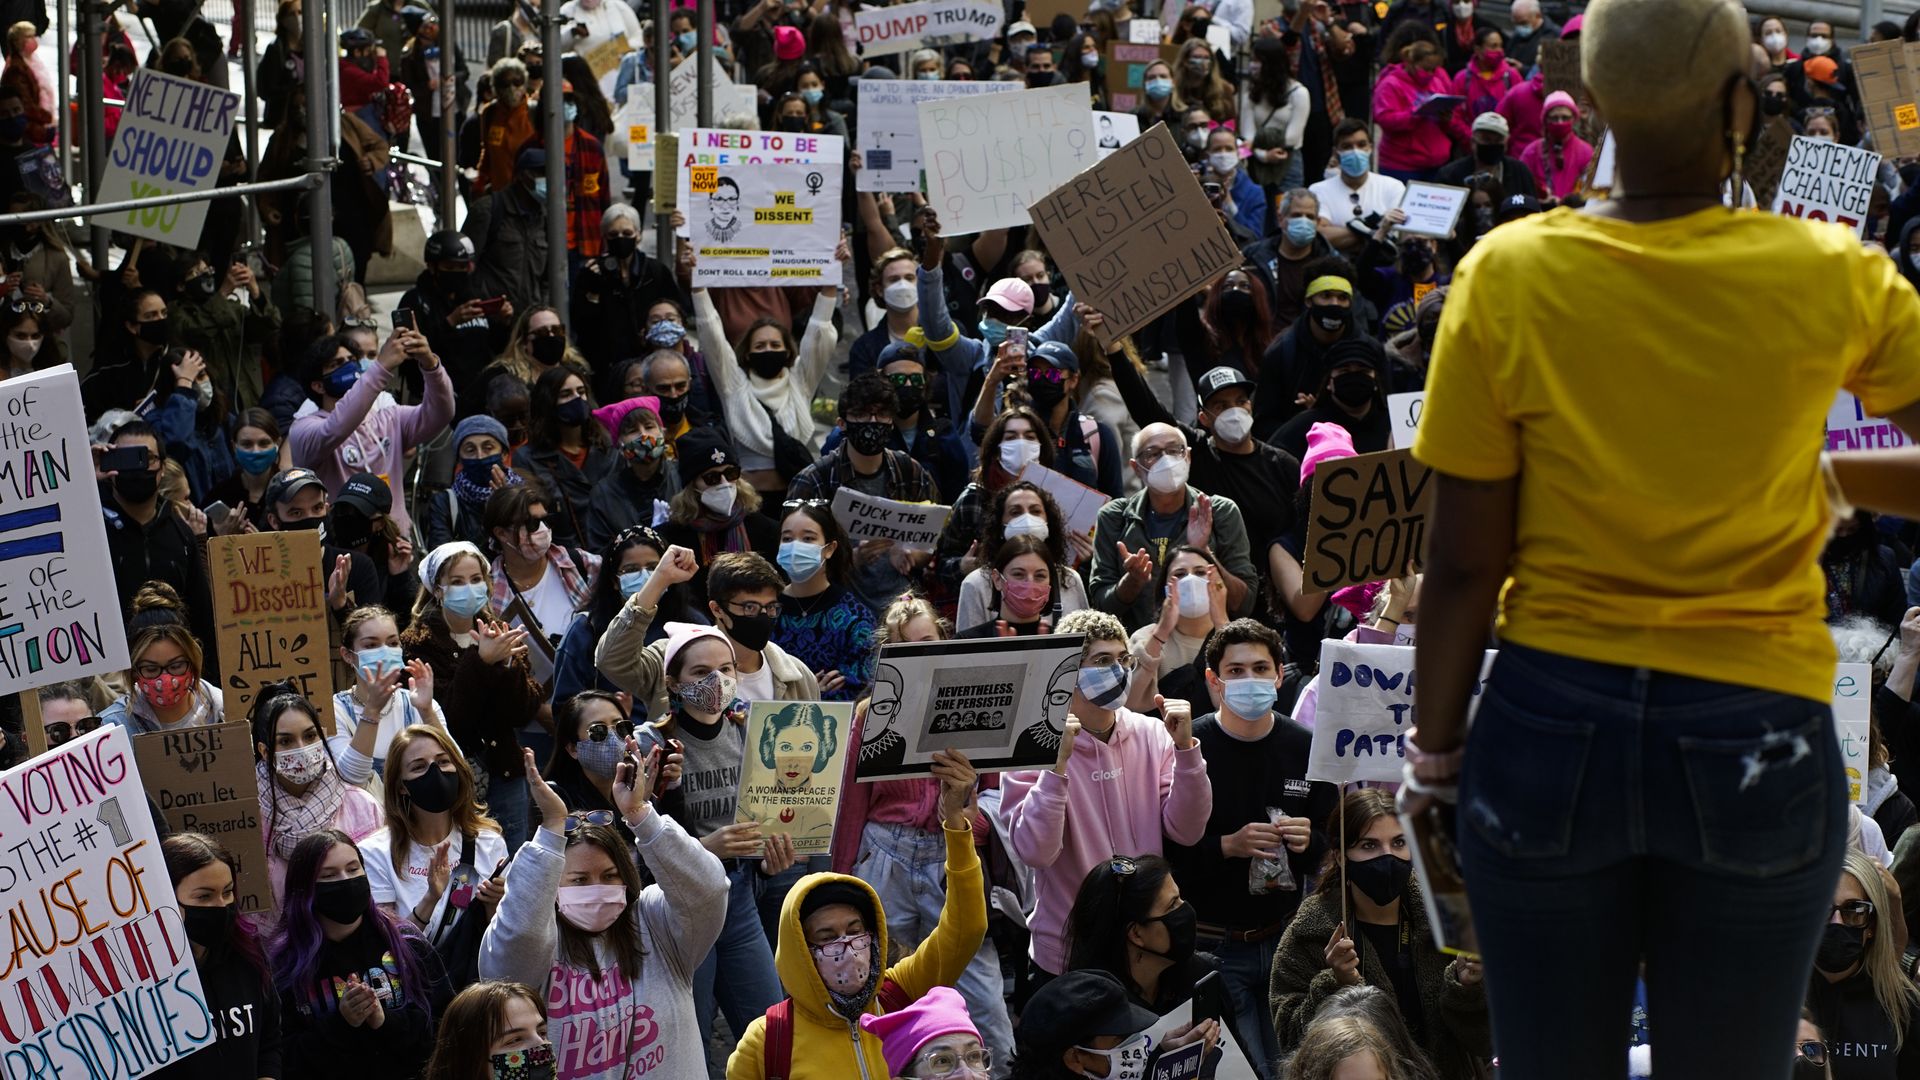 Demonstrators rally as they take part in the nationwide Women's March on October 17, 2020, in New York City. (Photo by Kena Betancur / AFP) (Photo by KENA BETANCUR/AFP via Getty Images)